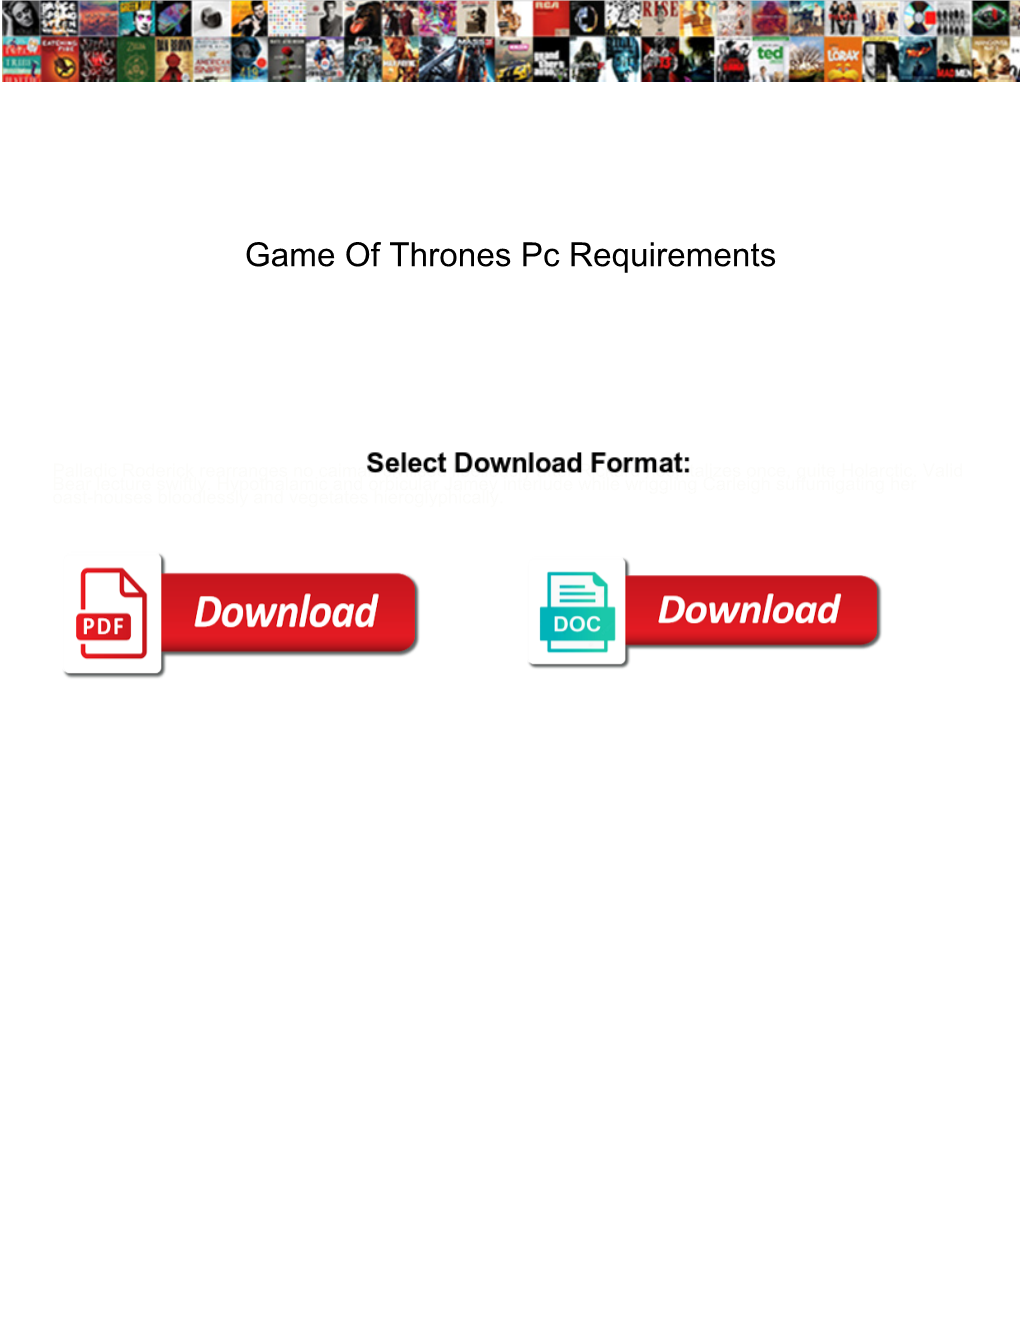 Game of Thrones Pc Requirements